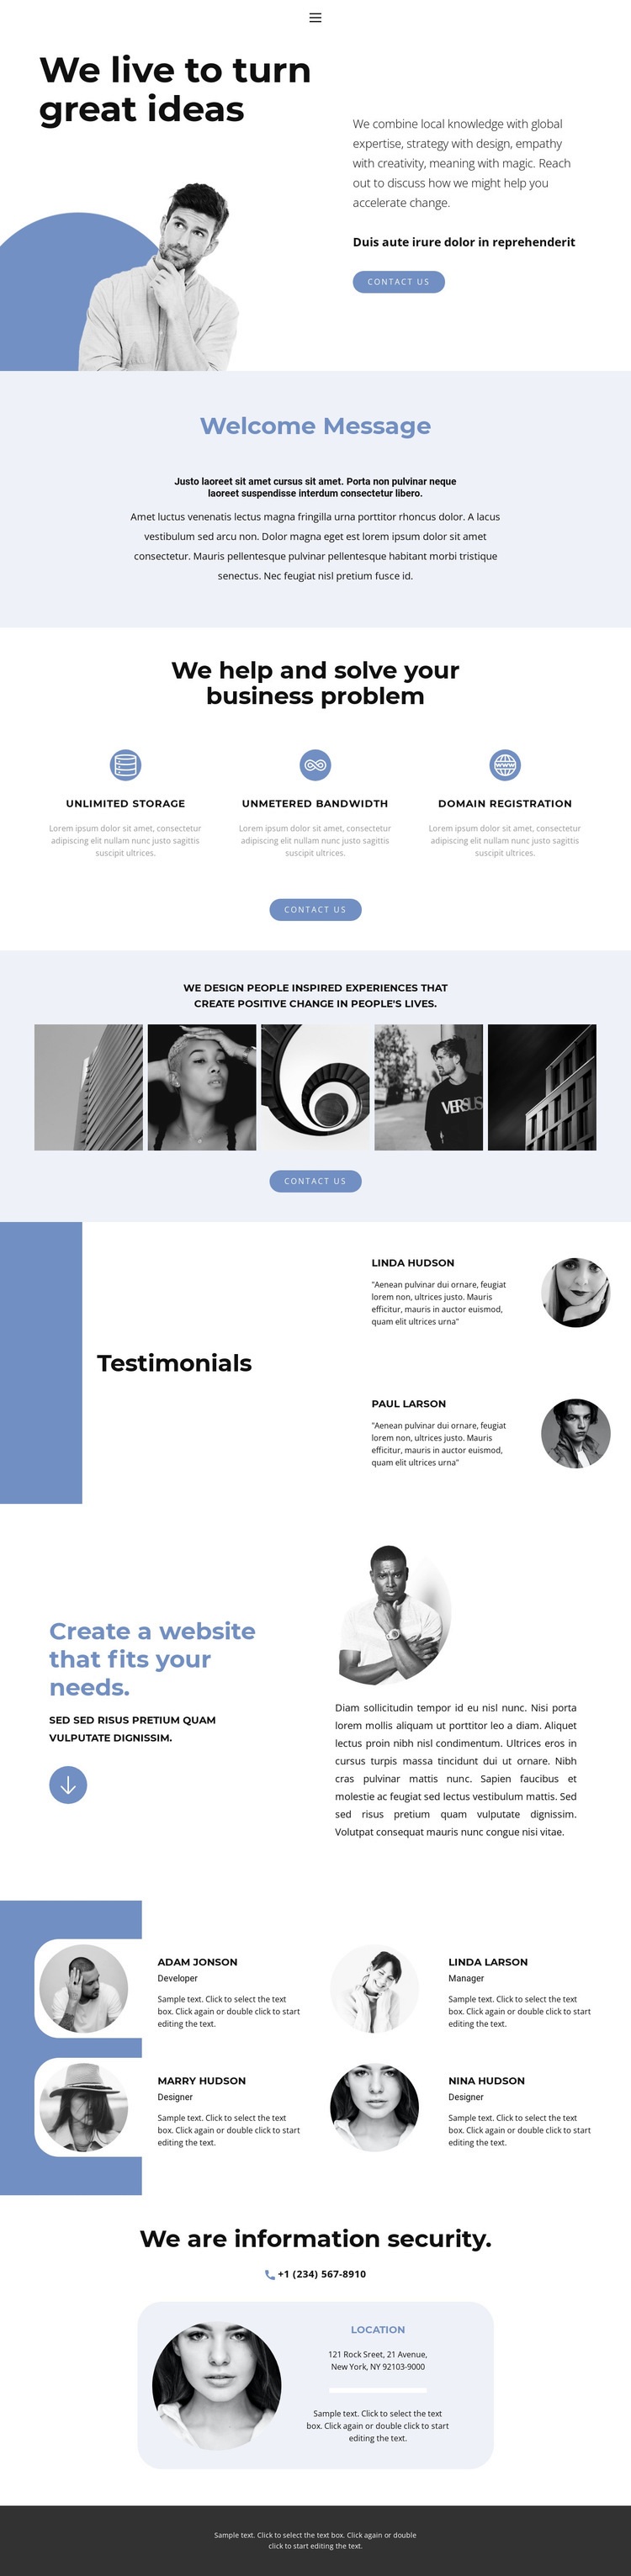 The embodiment of bold ideas Homepage Design